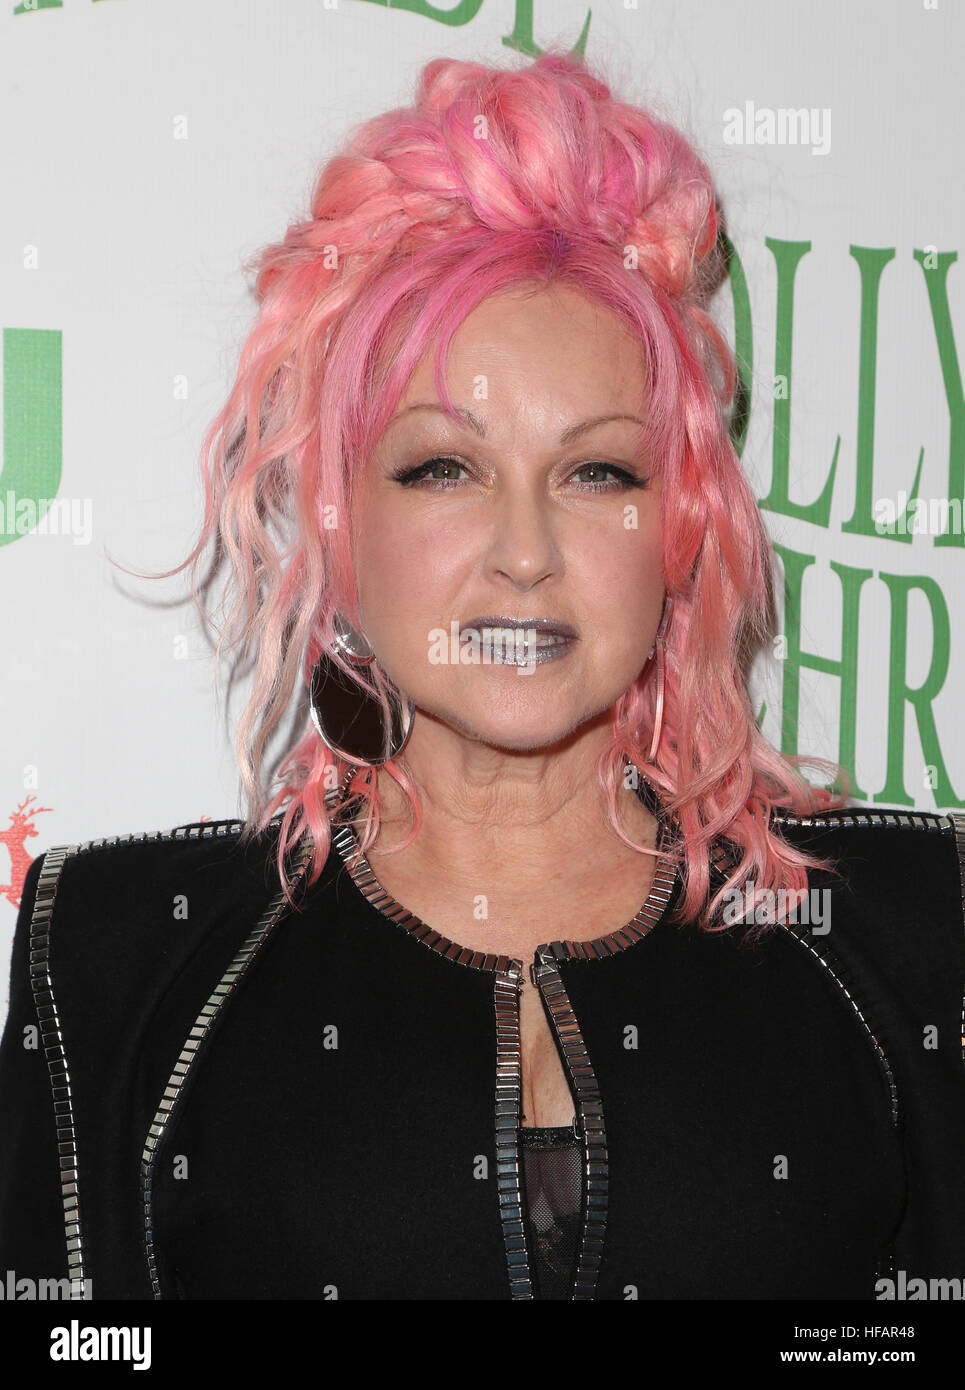 Cyndi Lauper Attending The 85th Annual Hollywood Christmas Parade In Hollywood California 